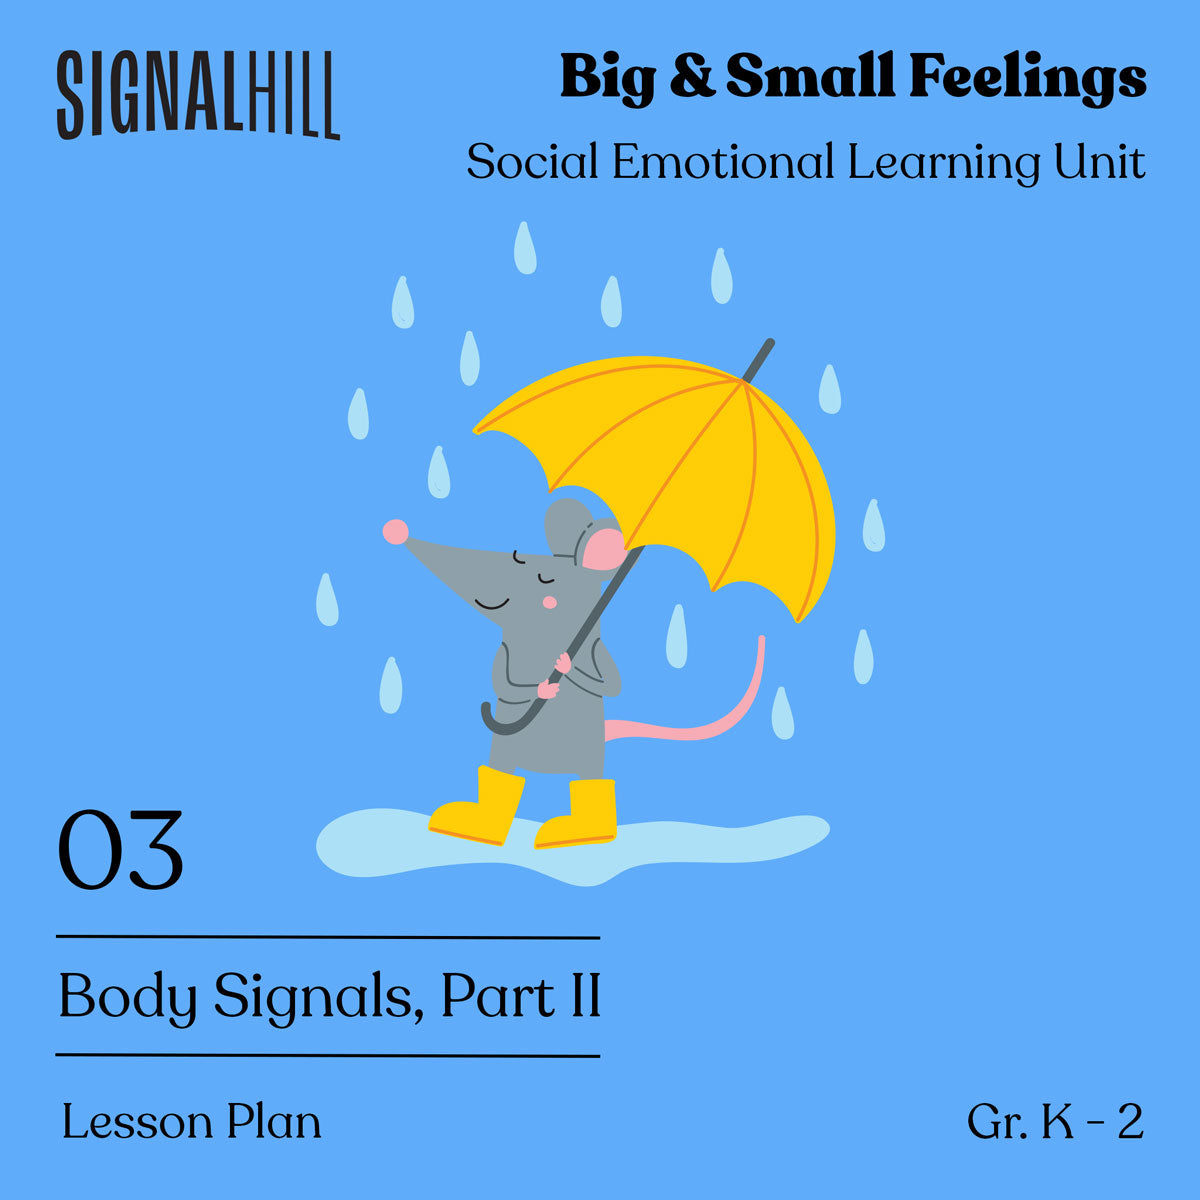 Lesson Plan 3: Body Signals, Part II